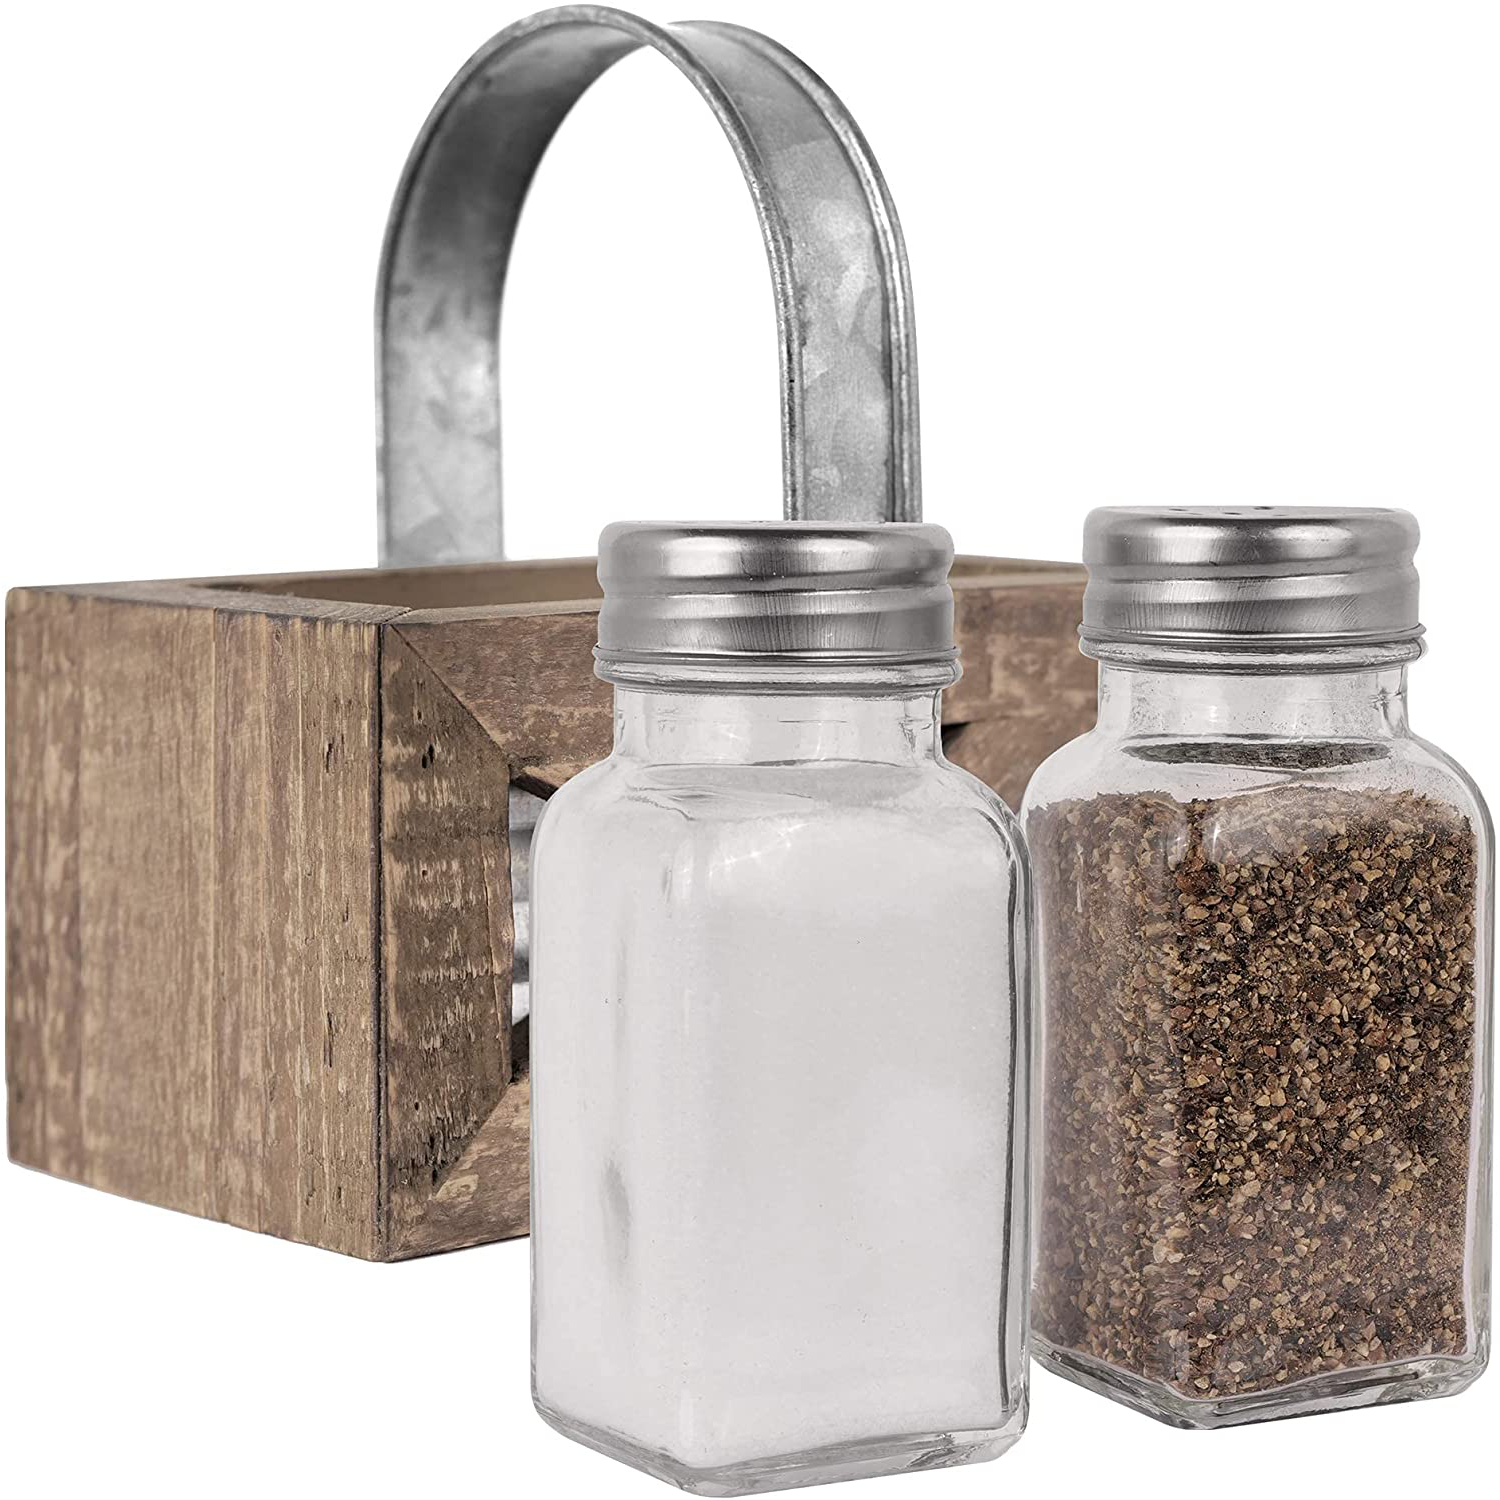 Autumn Alley Barn Door Rustic Salt and Pepper Shakers Set in Wood and Galvanized Caddy | Farmhouse Salt and Pepper Shakers For Rustic Kitchen Decor | Rustic Kitchen Accessory for your Country Kitchen